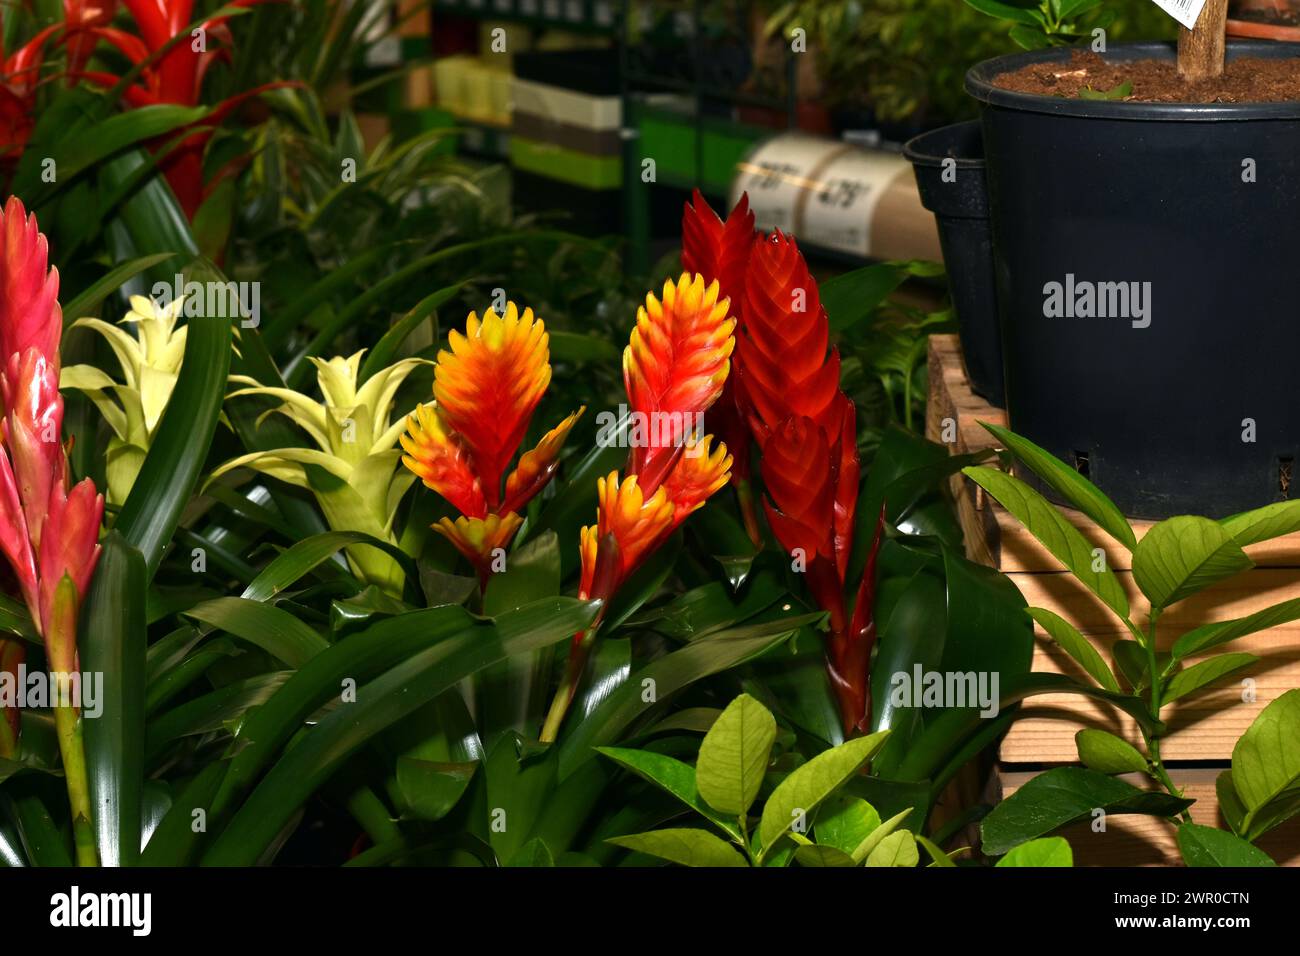 The picture shows a houseplant with red color Vriesea carinata Stock Photo